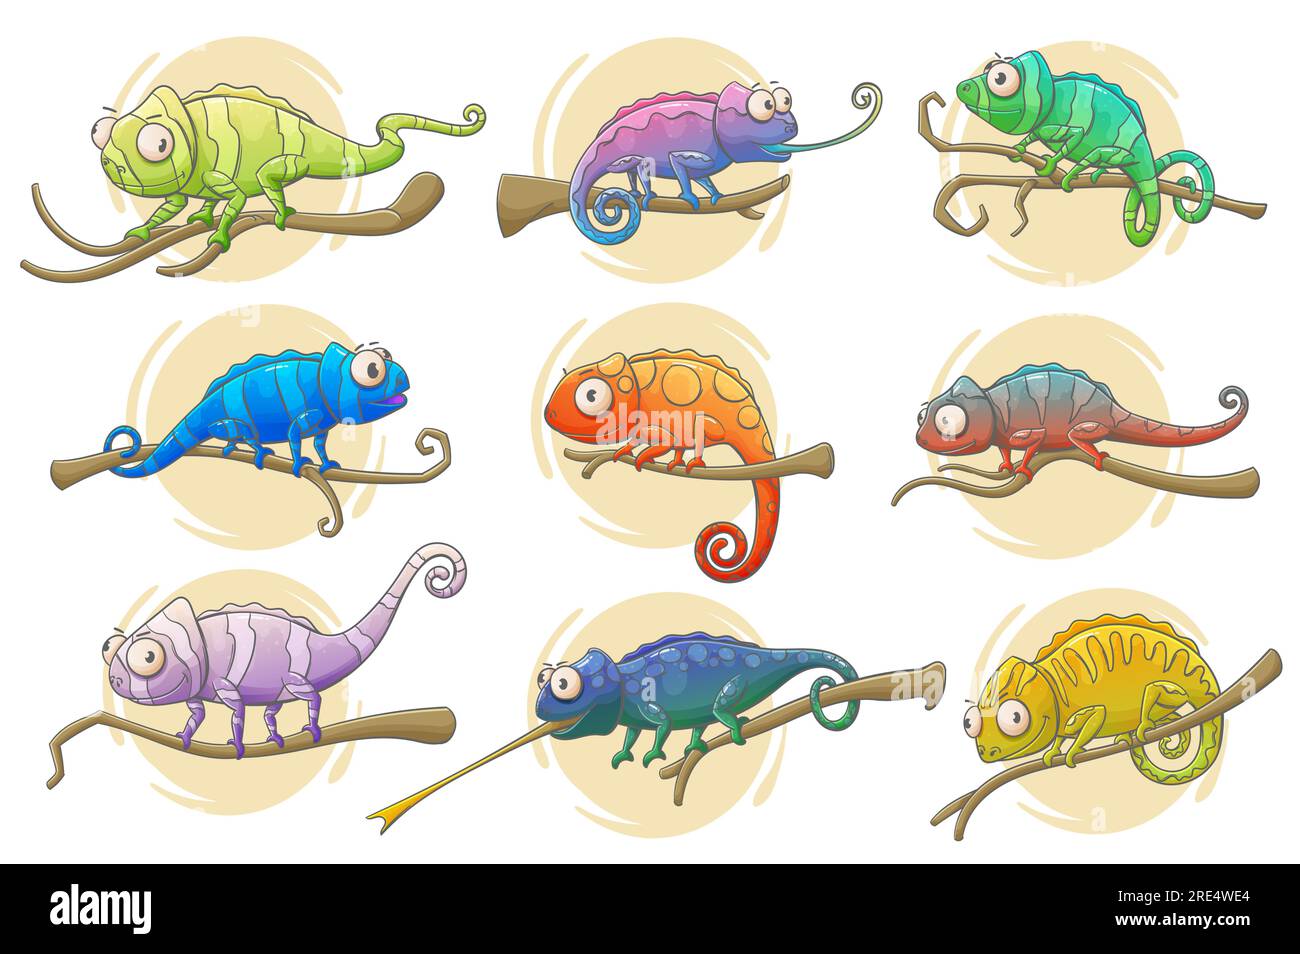 Chameleon lizard icons of reptile animals vector design. Colorful chameleons sitting on branches of exotic tropical forest or jungle tree with long tails, tongues and bright camouflage patterns Stock Vector